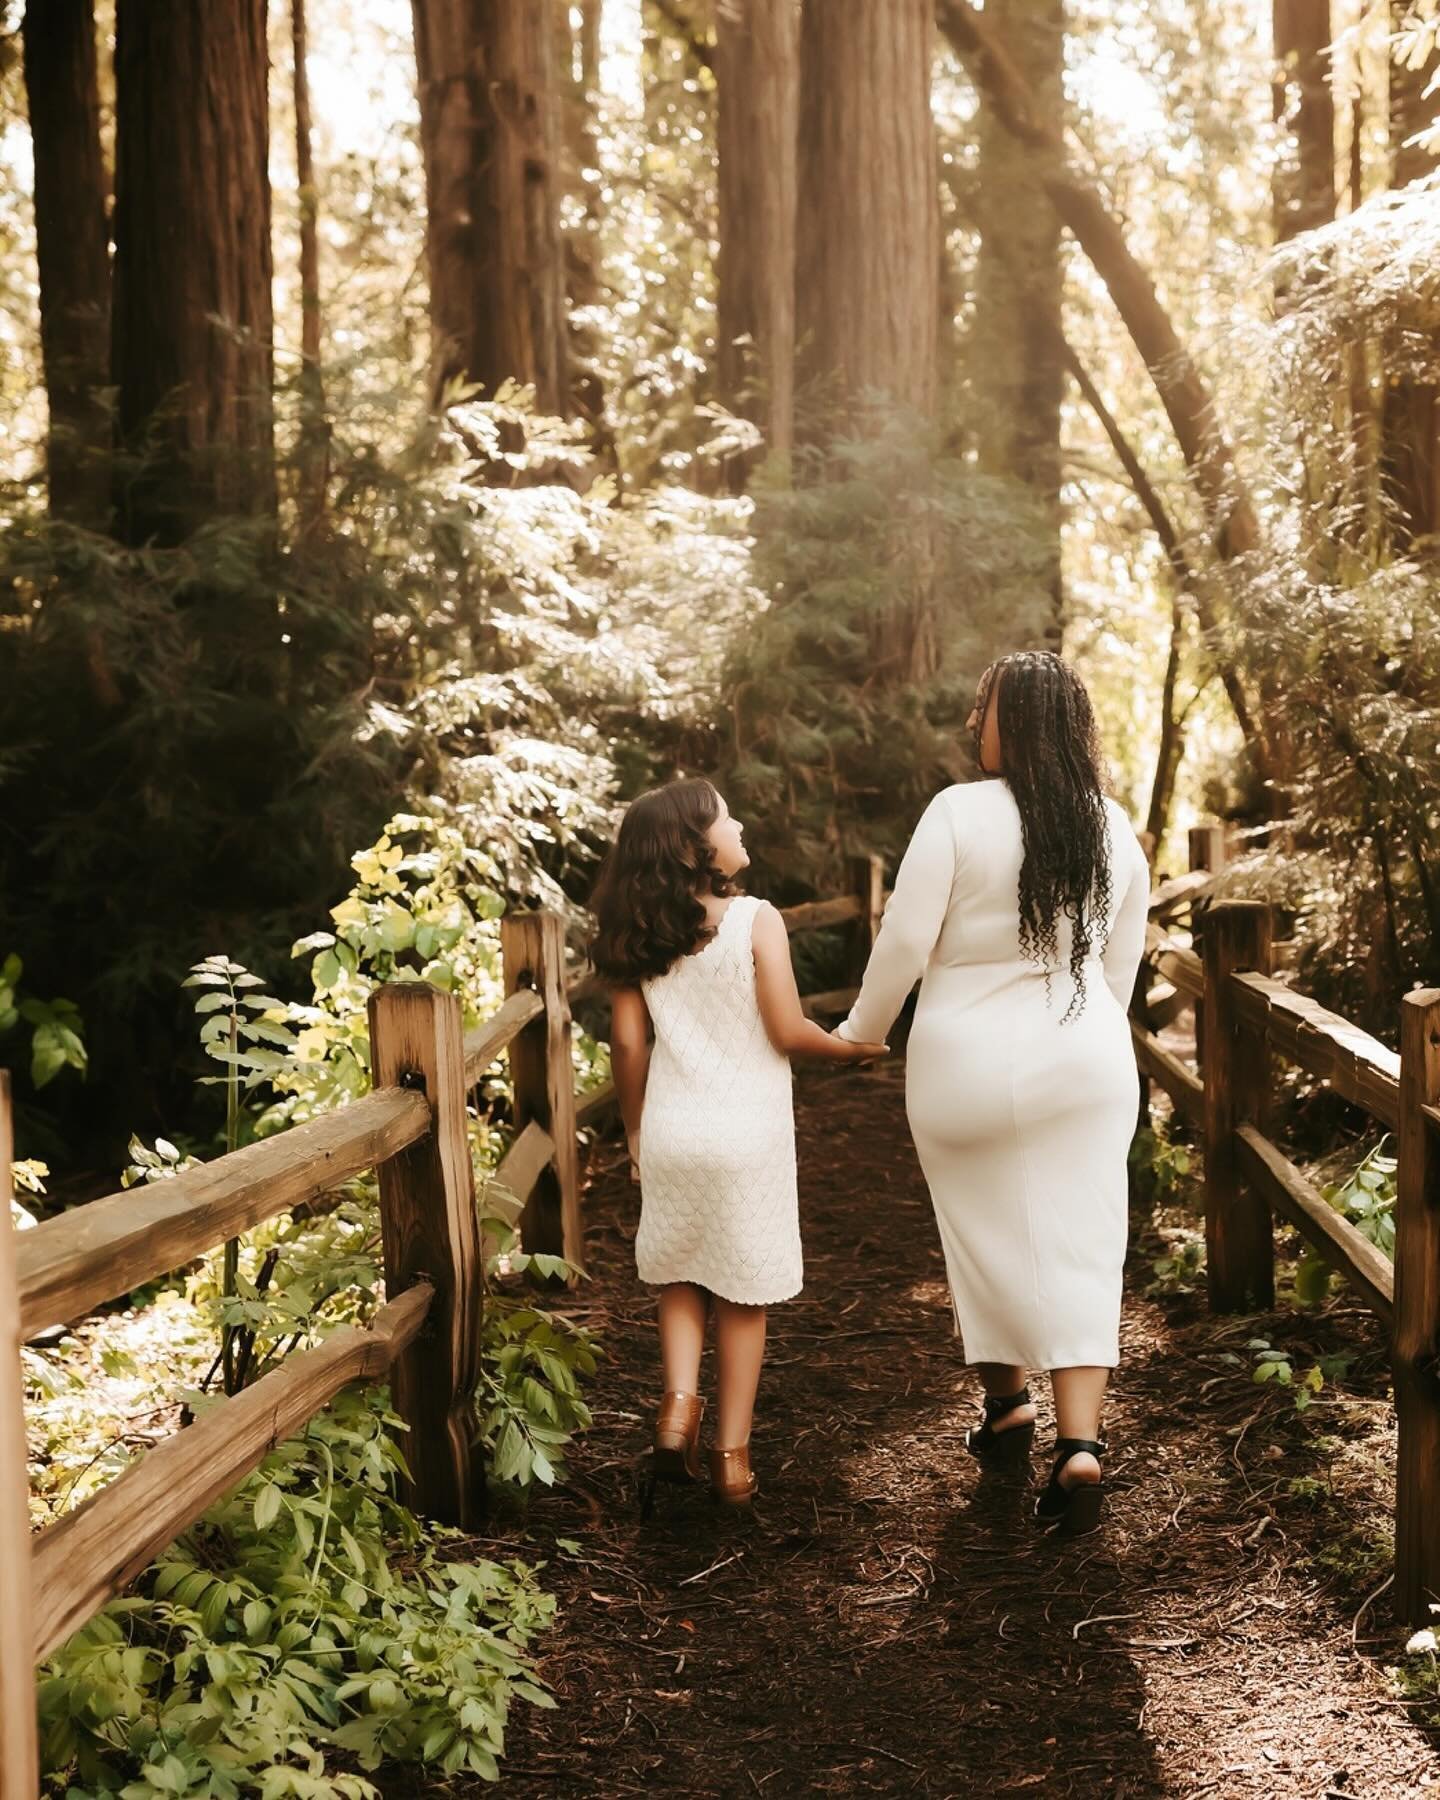 It rained all day and then the sun came out for their session 🙌🏻. It&rsquo;s a little rare to get glowy light in the redwoods but we did and it&rsquo;s so fun editing different types of light, clothing colors and scenery. Demi - your family was the